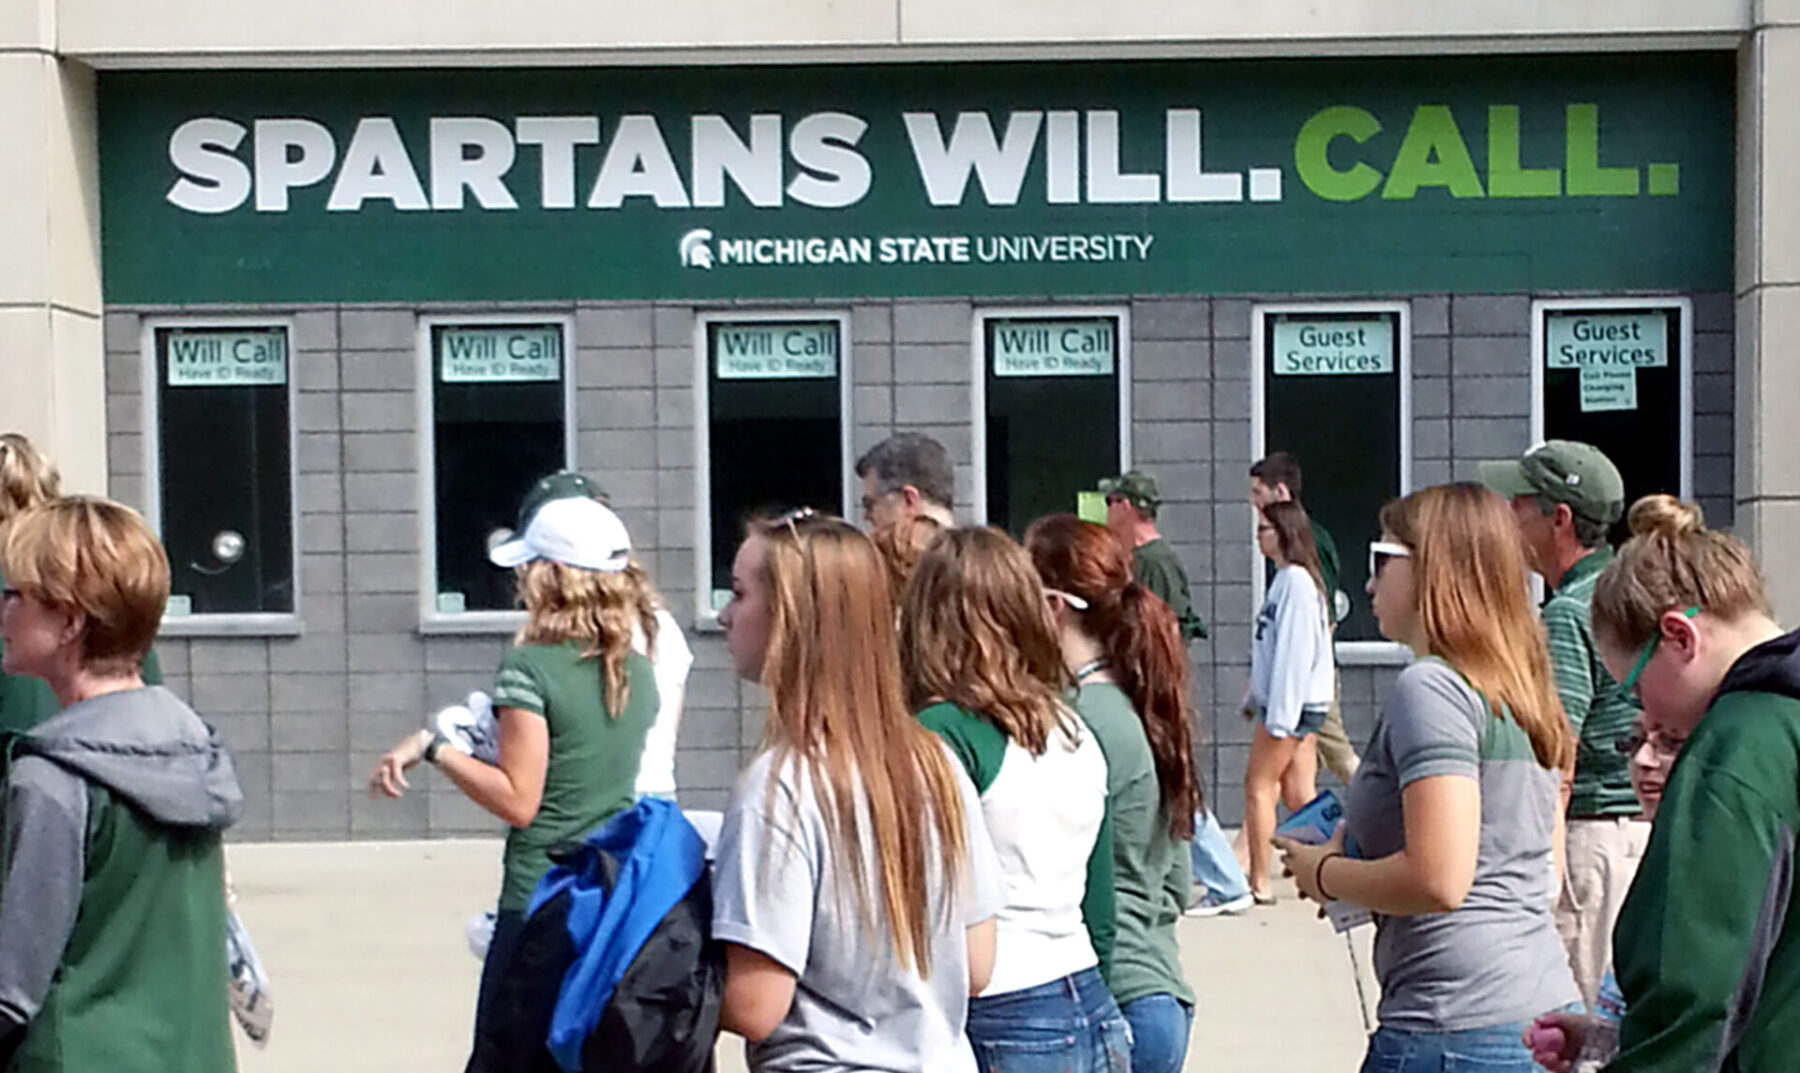 Banner at the Spartan Stadium Will Call office saying "Spartans will. Call."